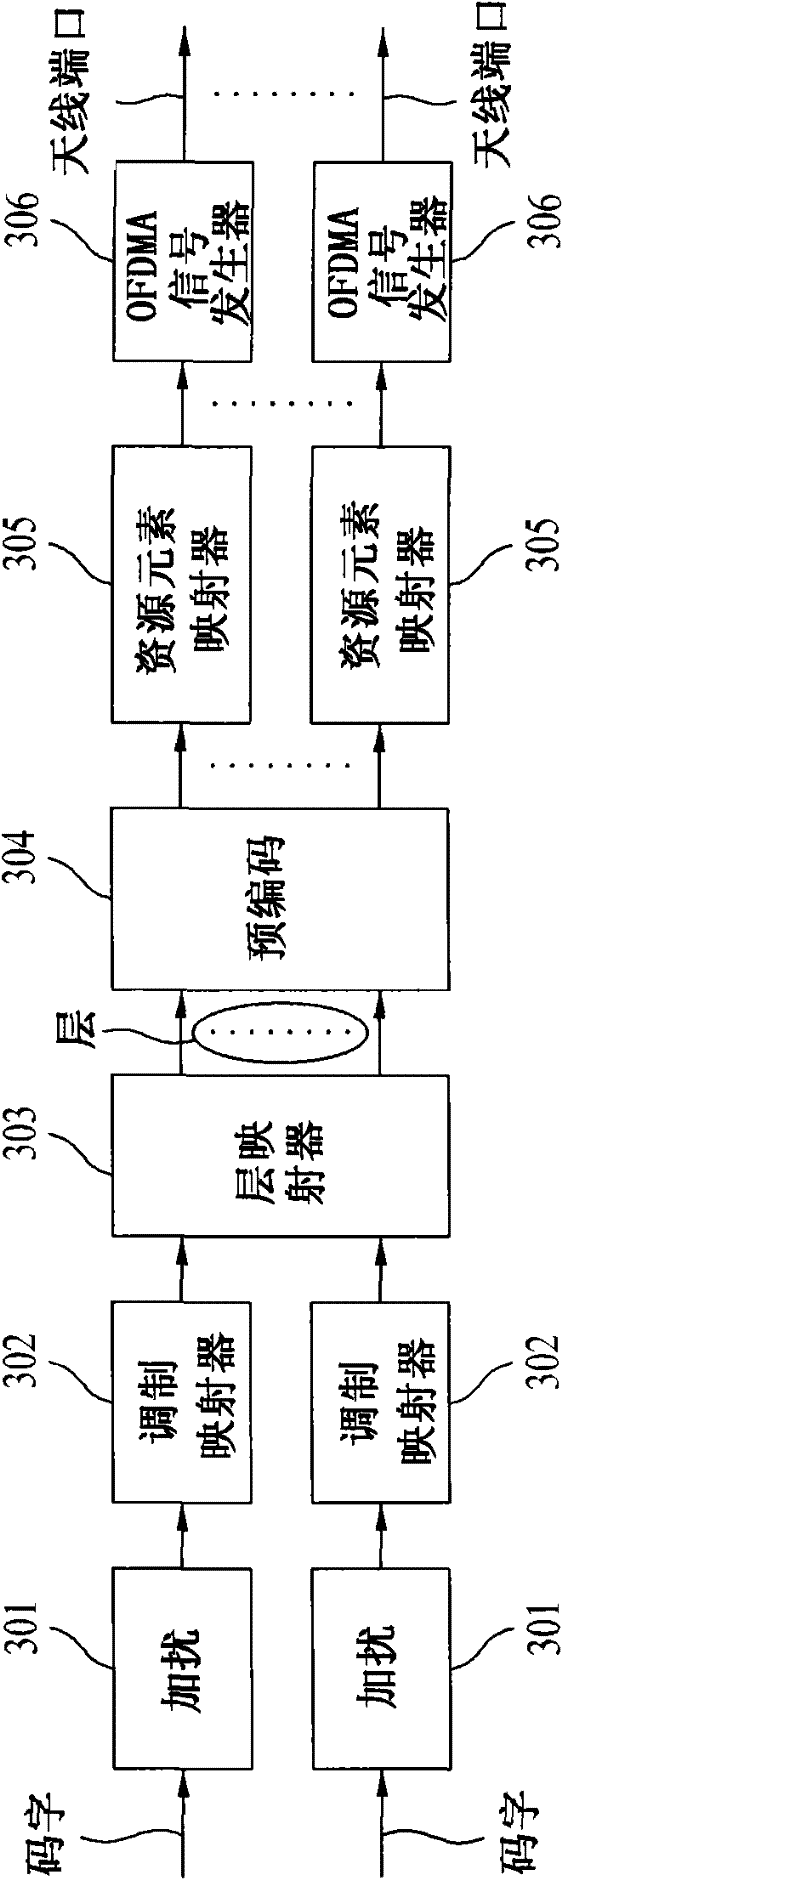 Method for transmitting control information in wireless communication system and apparatus therefor